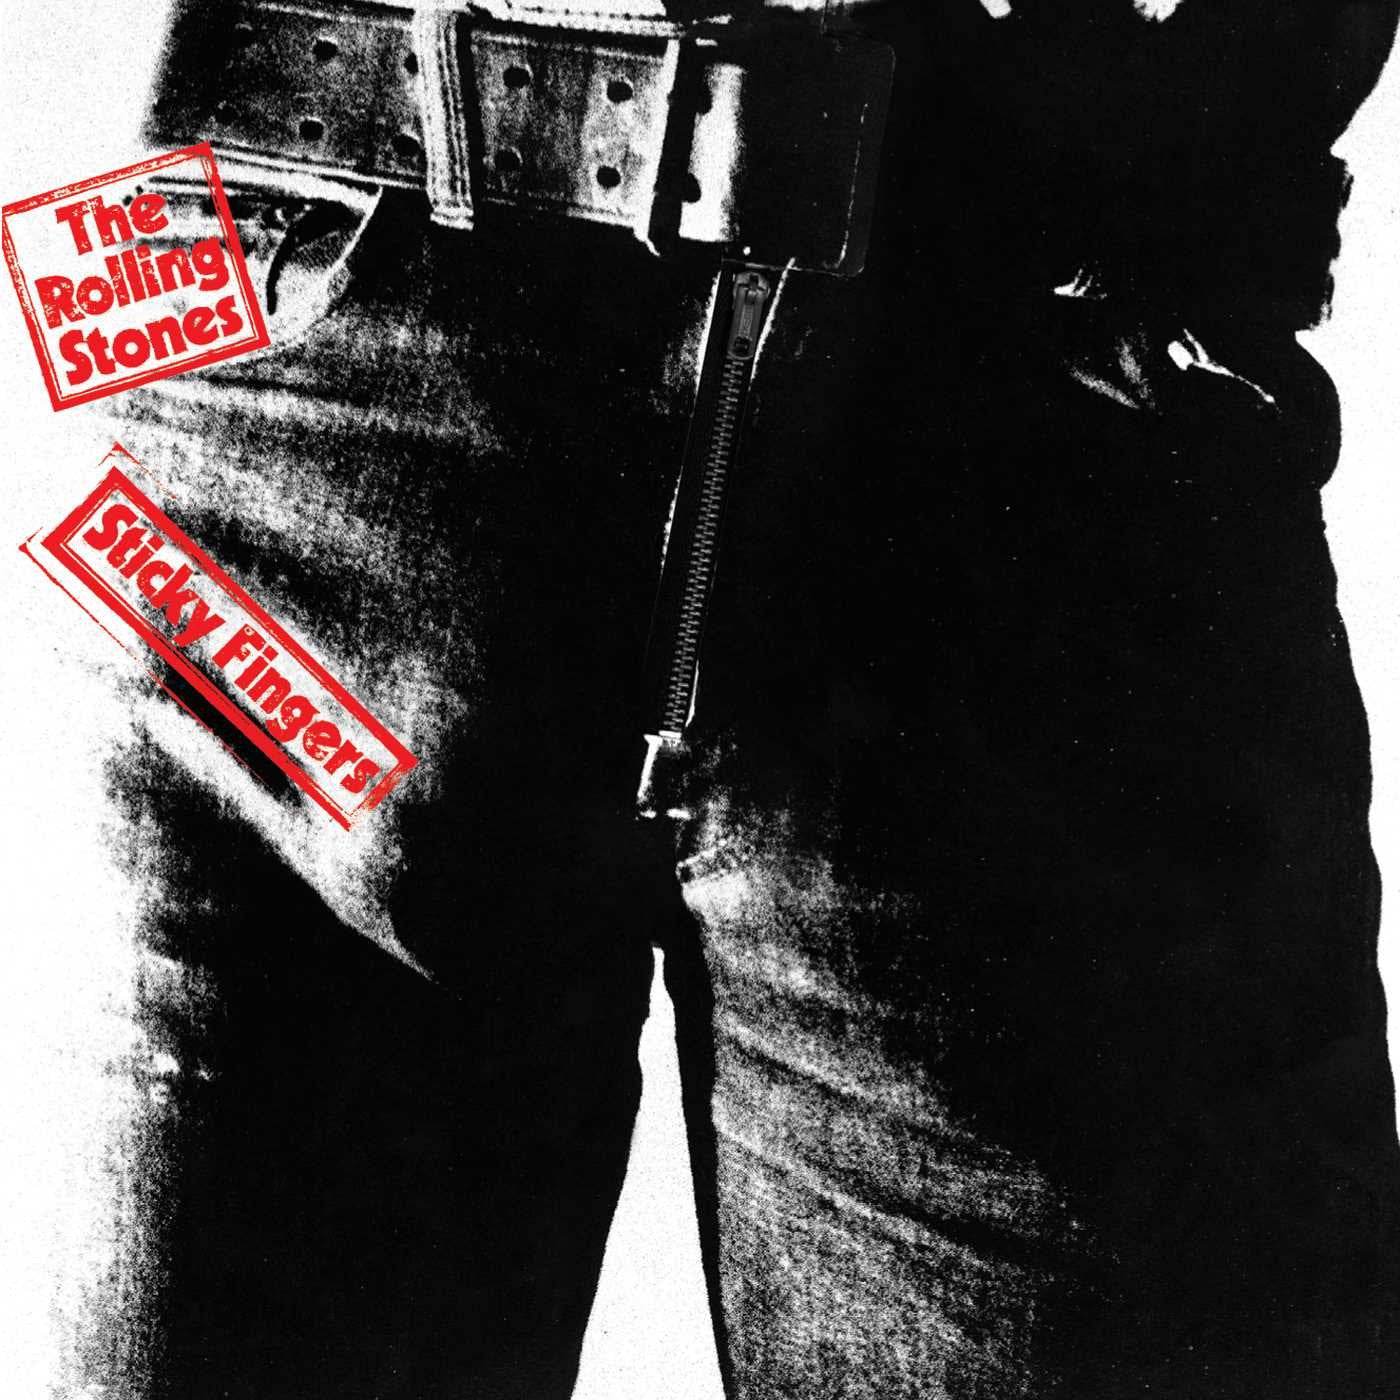 The 5 best album covers with jeans – capitandenim